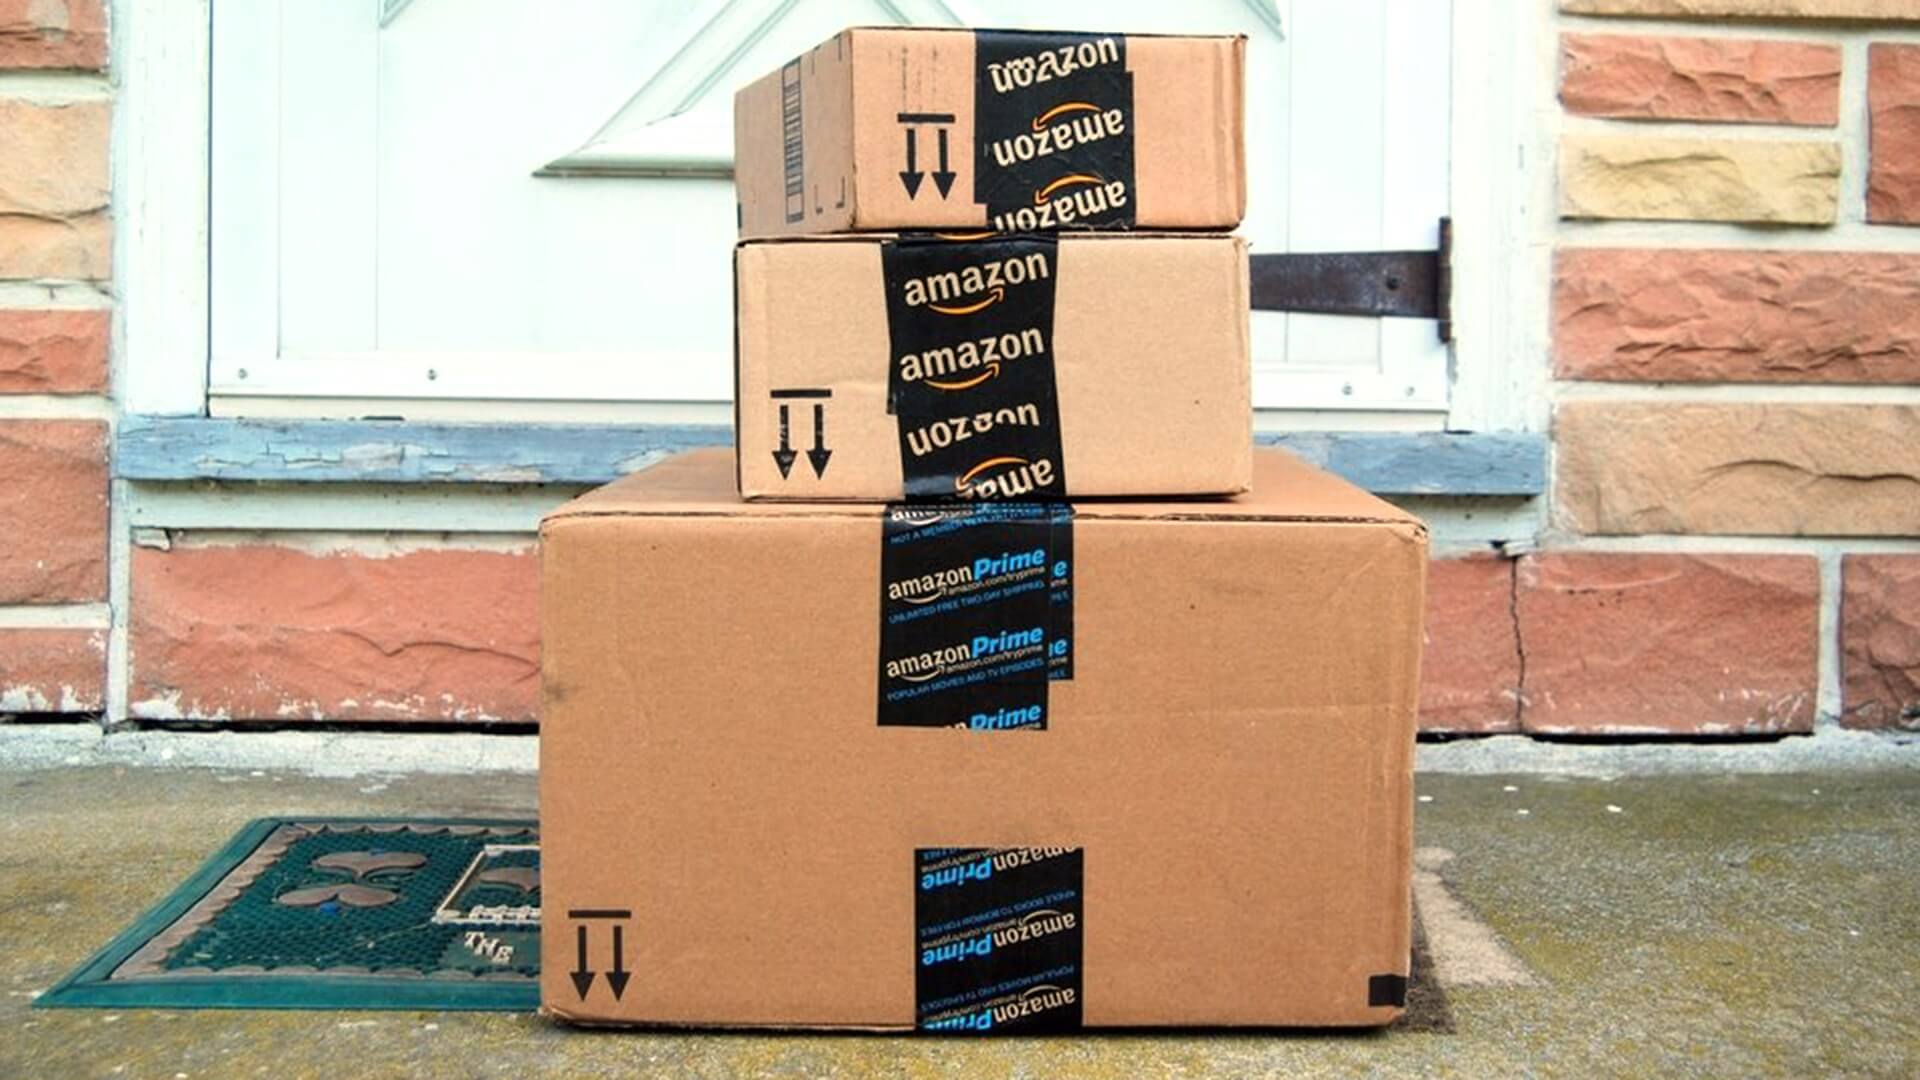 Amazon reportedly changing Subscribe & Save order pricing without notice